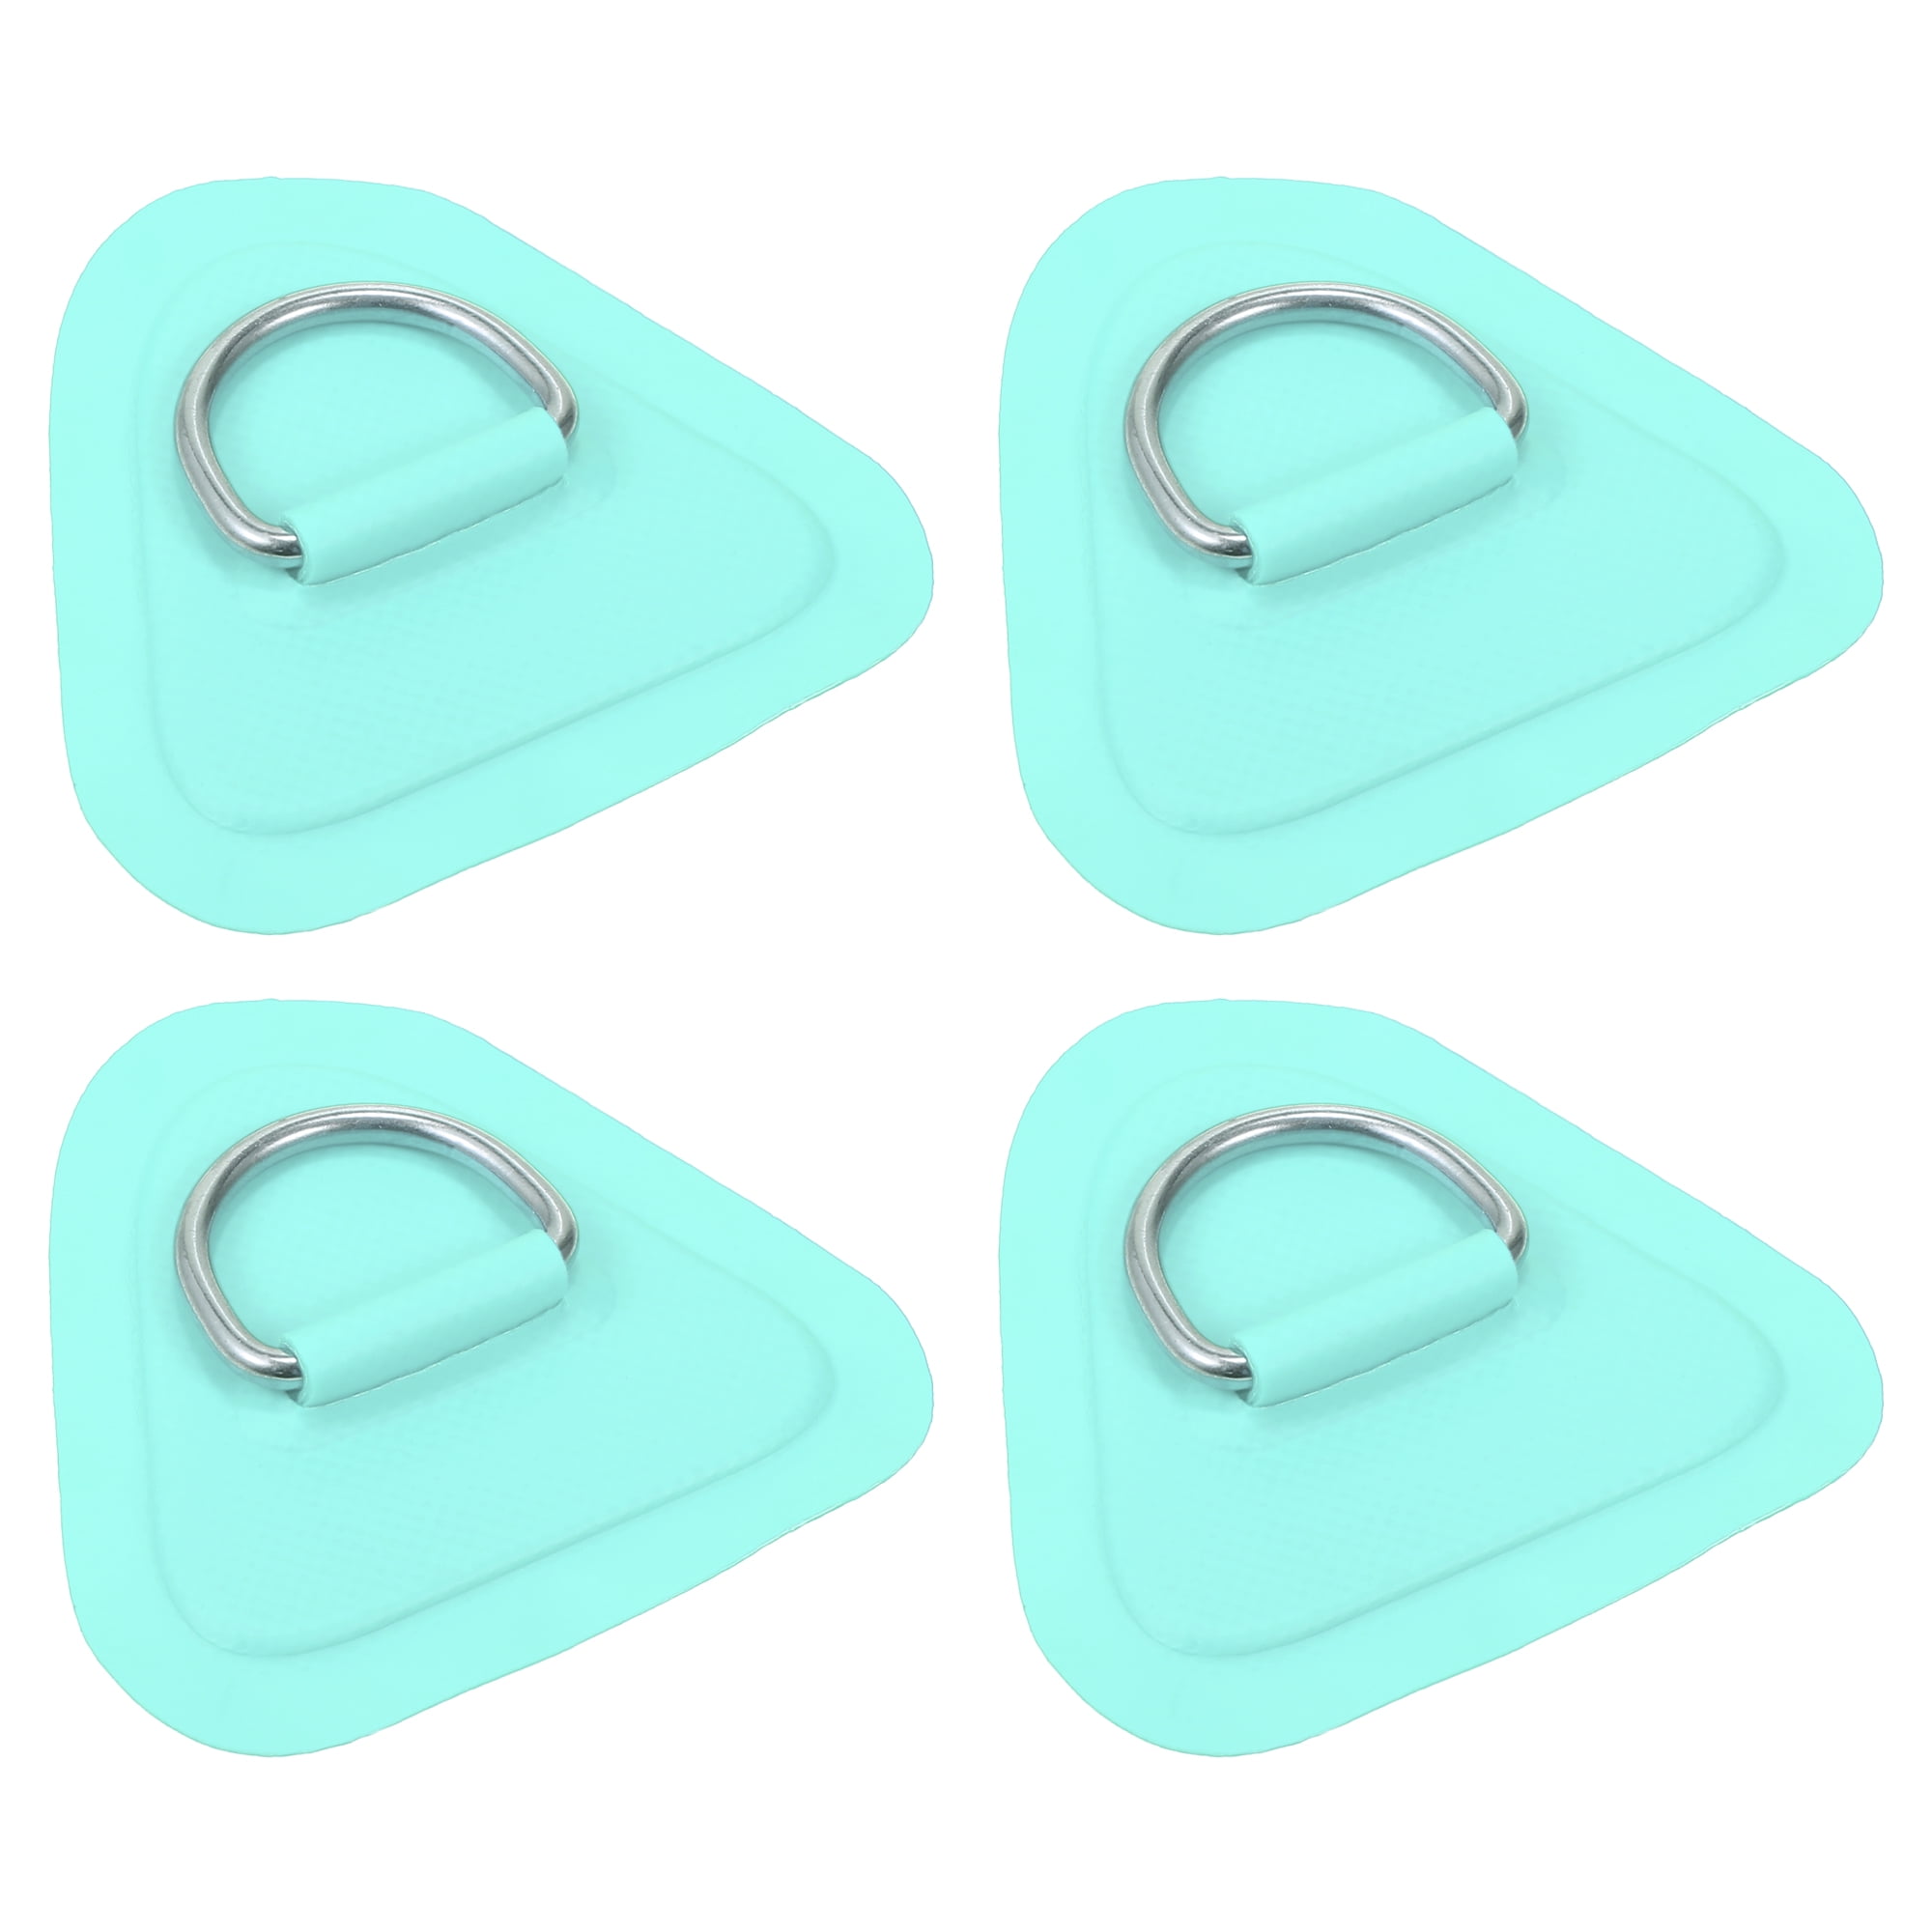 4pcs D Ring Patch PVC Stainless Steel Triangle Shape D Ring Pad